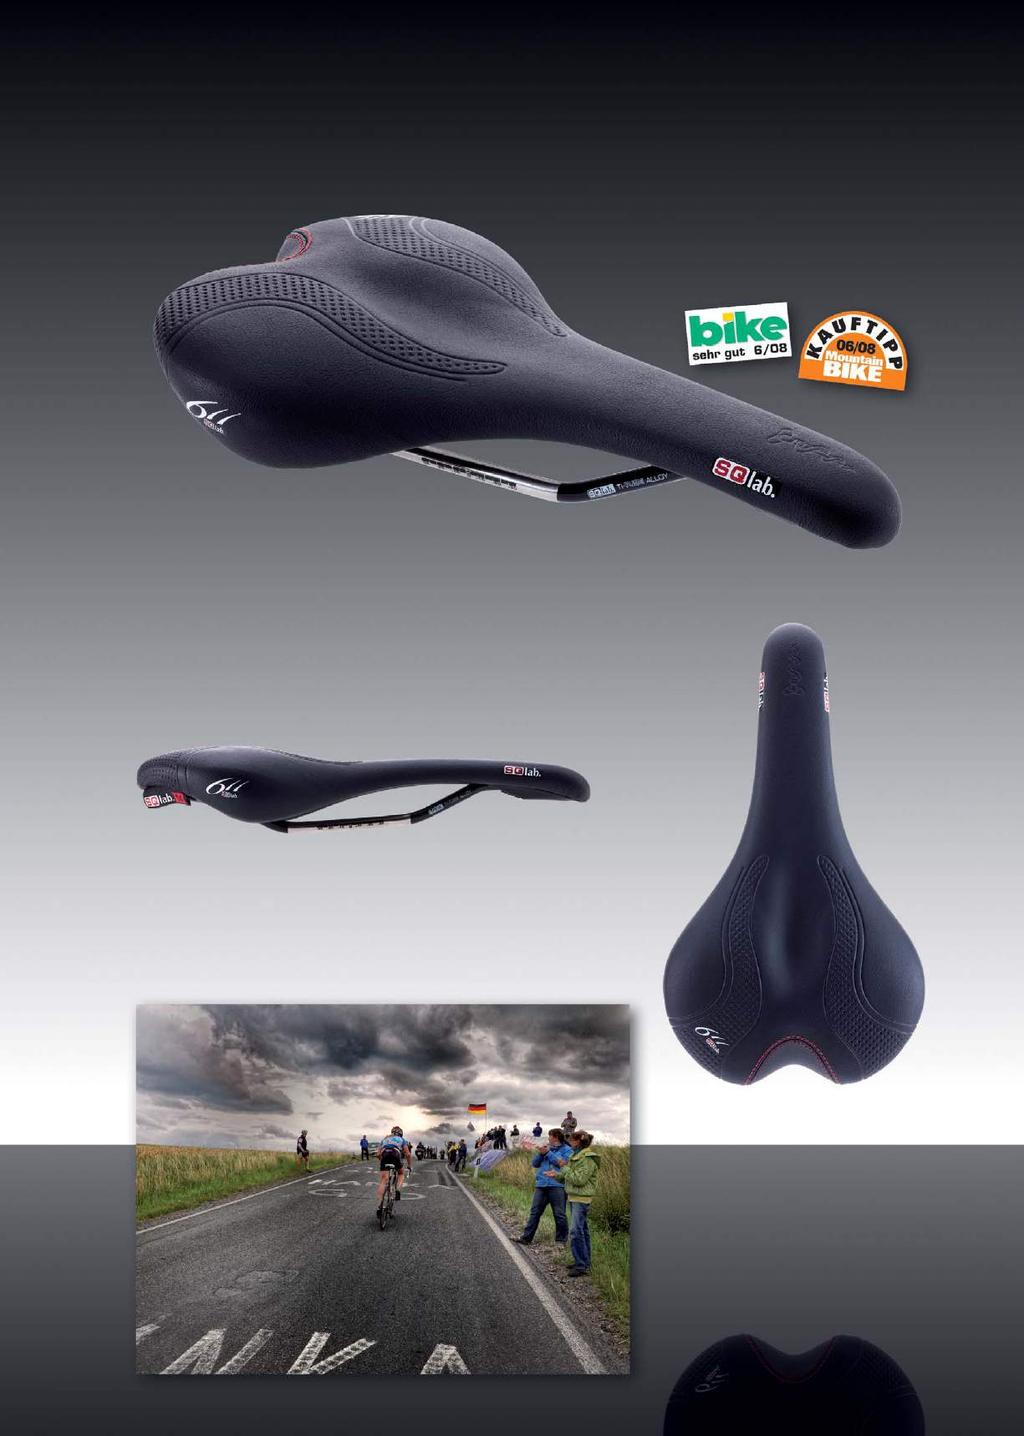 RACE Road and MTB saddles come with a lowered saddle nose and more space for your sensitive areas.